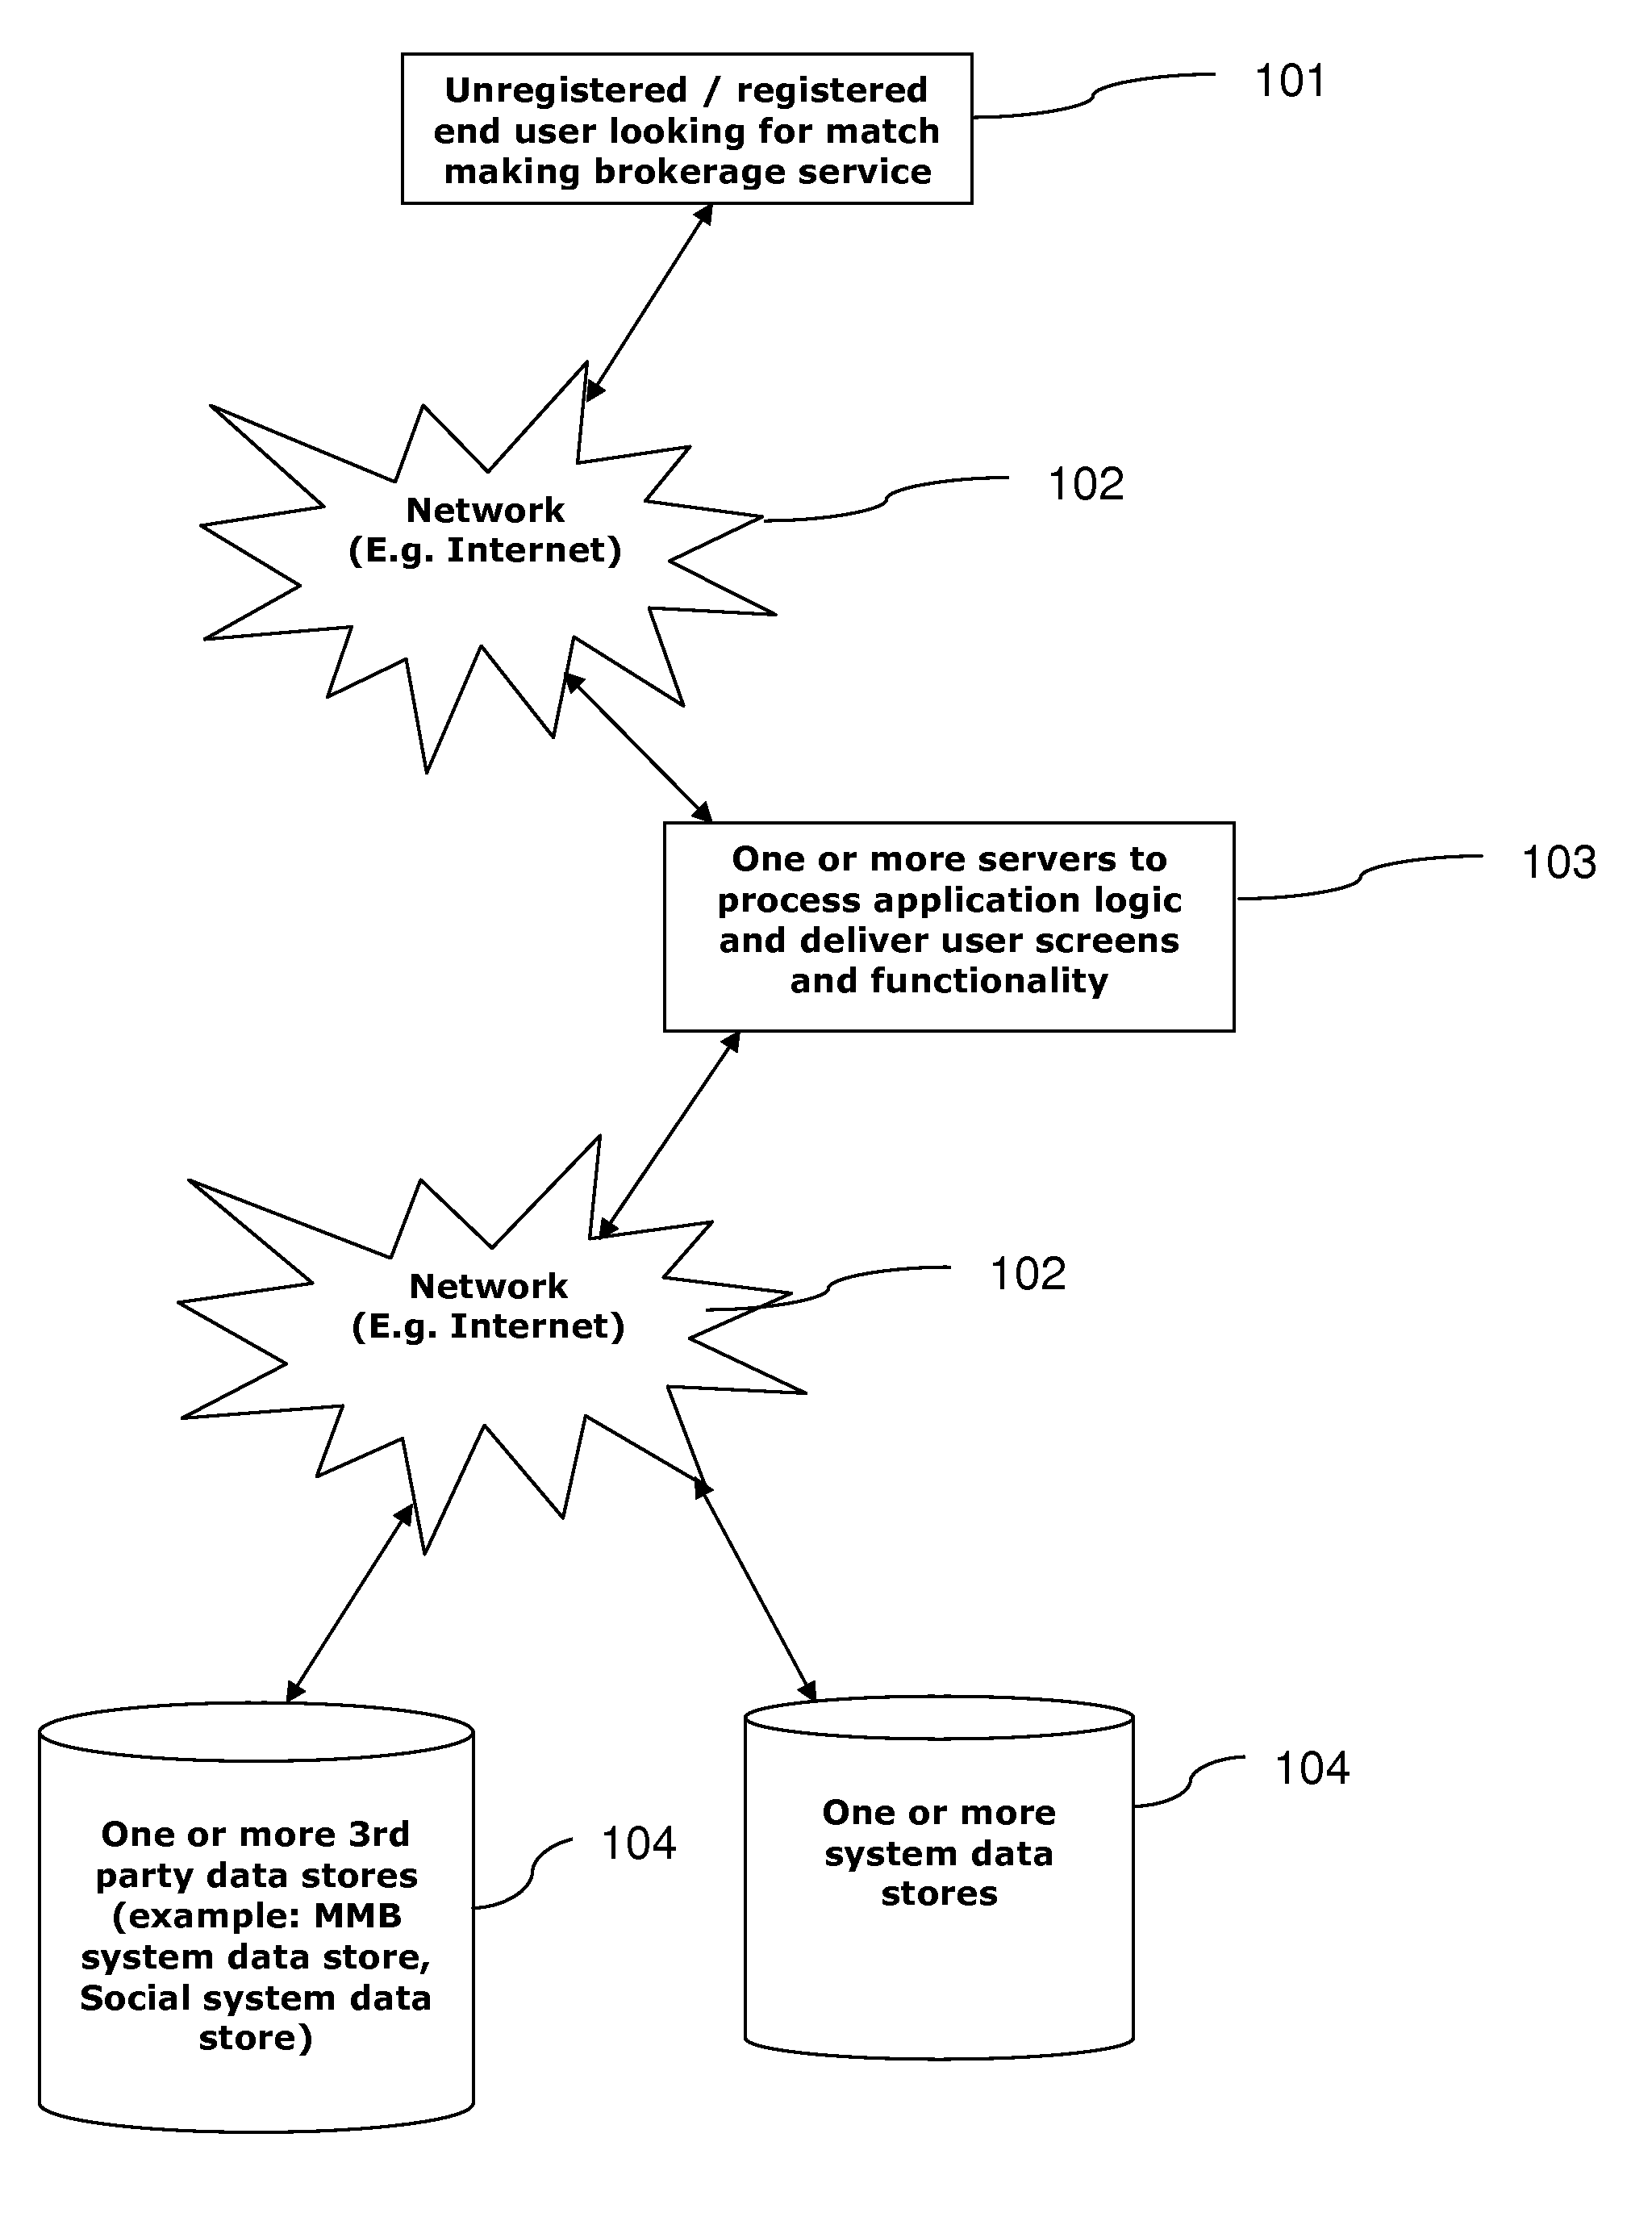 Collaborative match making system and method with a per-profile confidential information purchase option